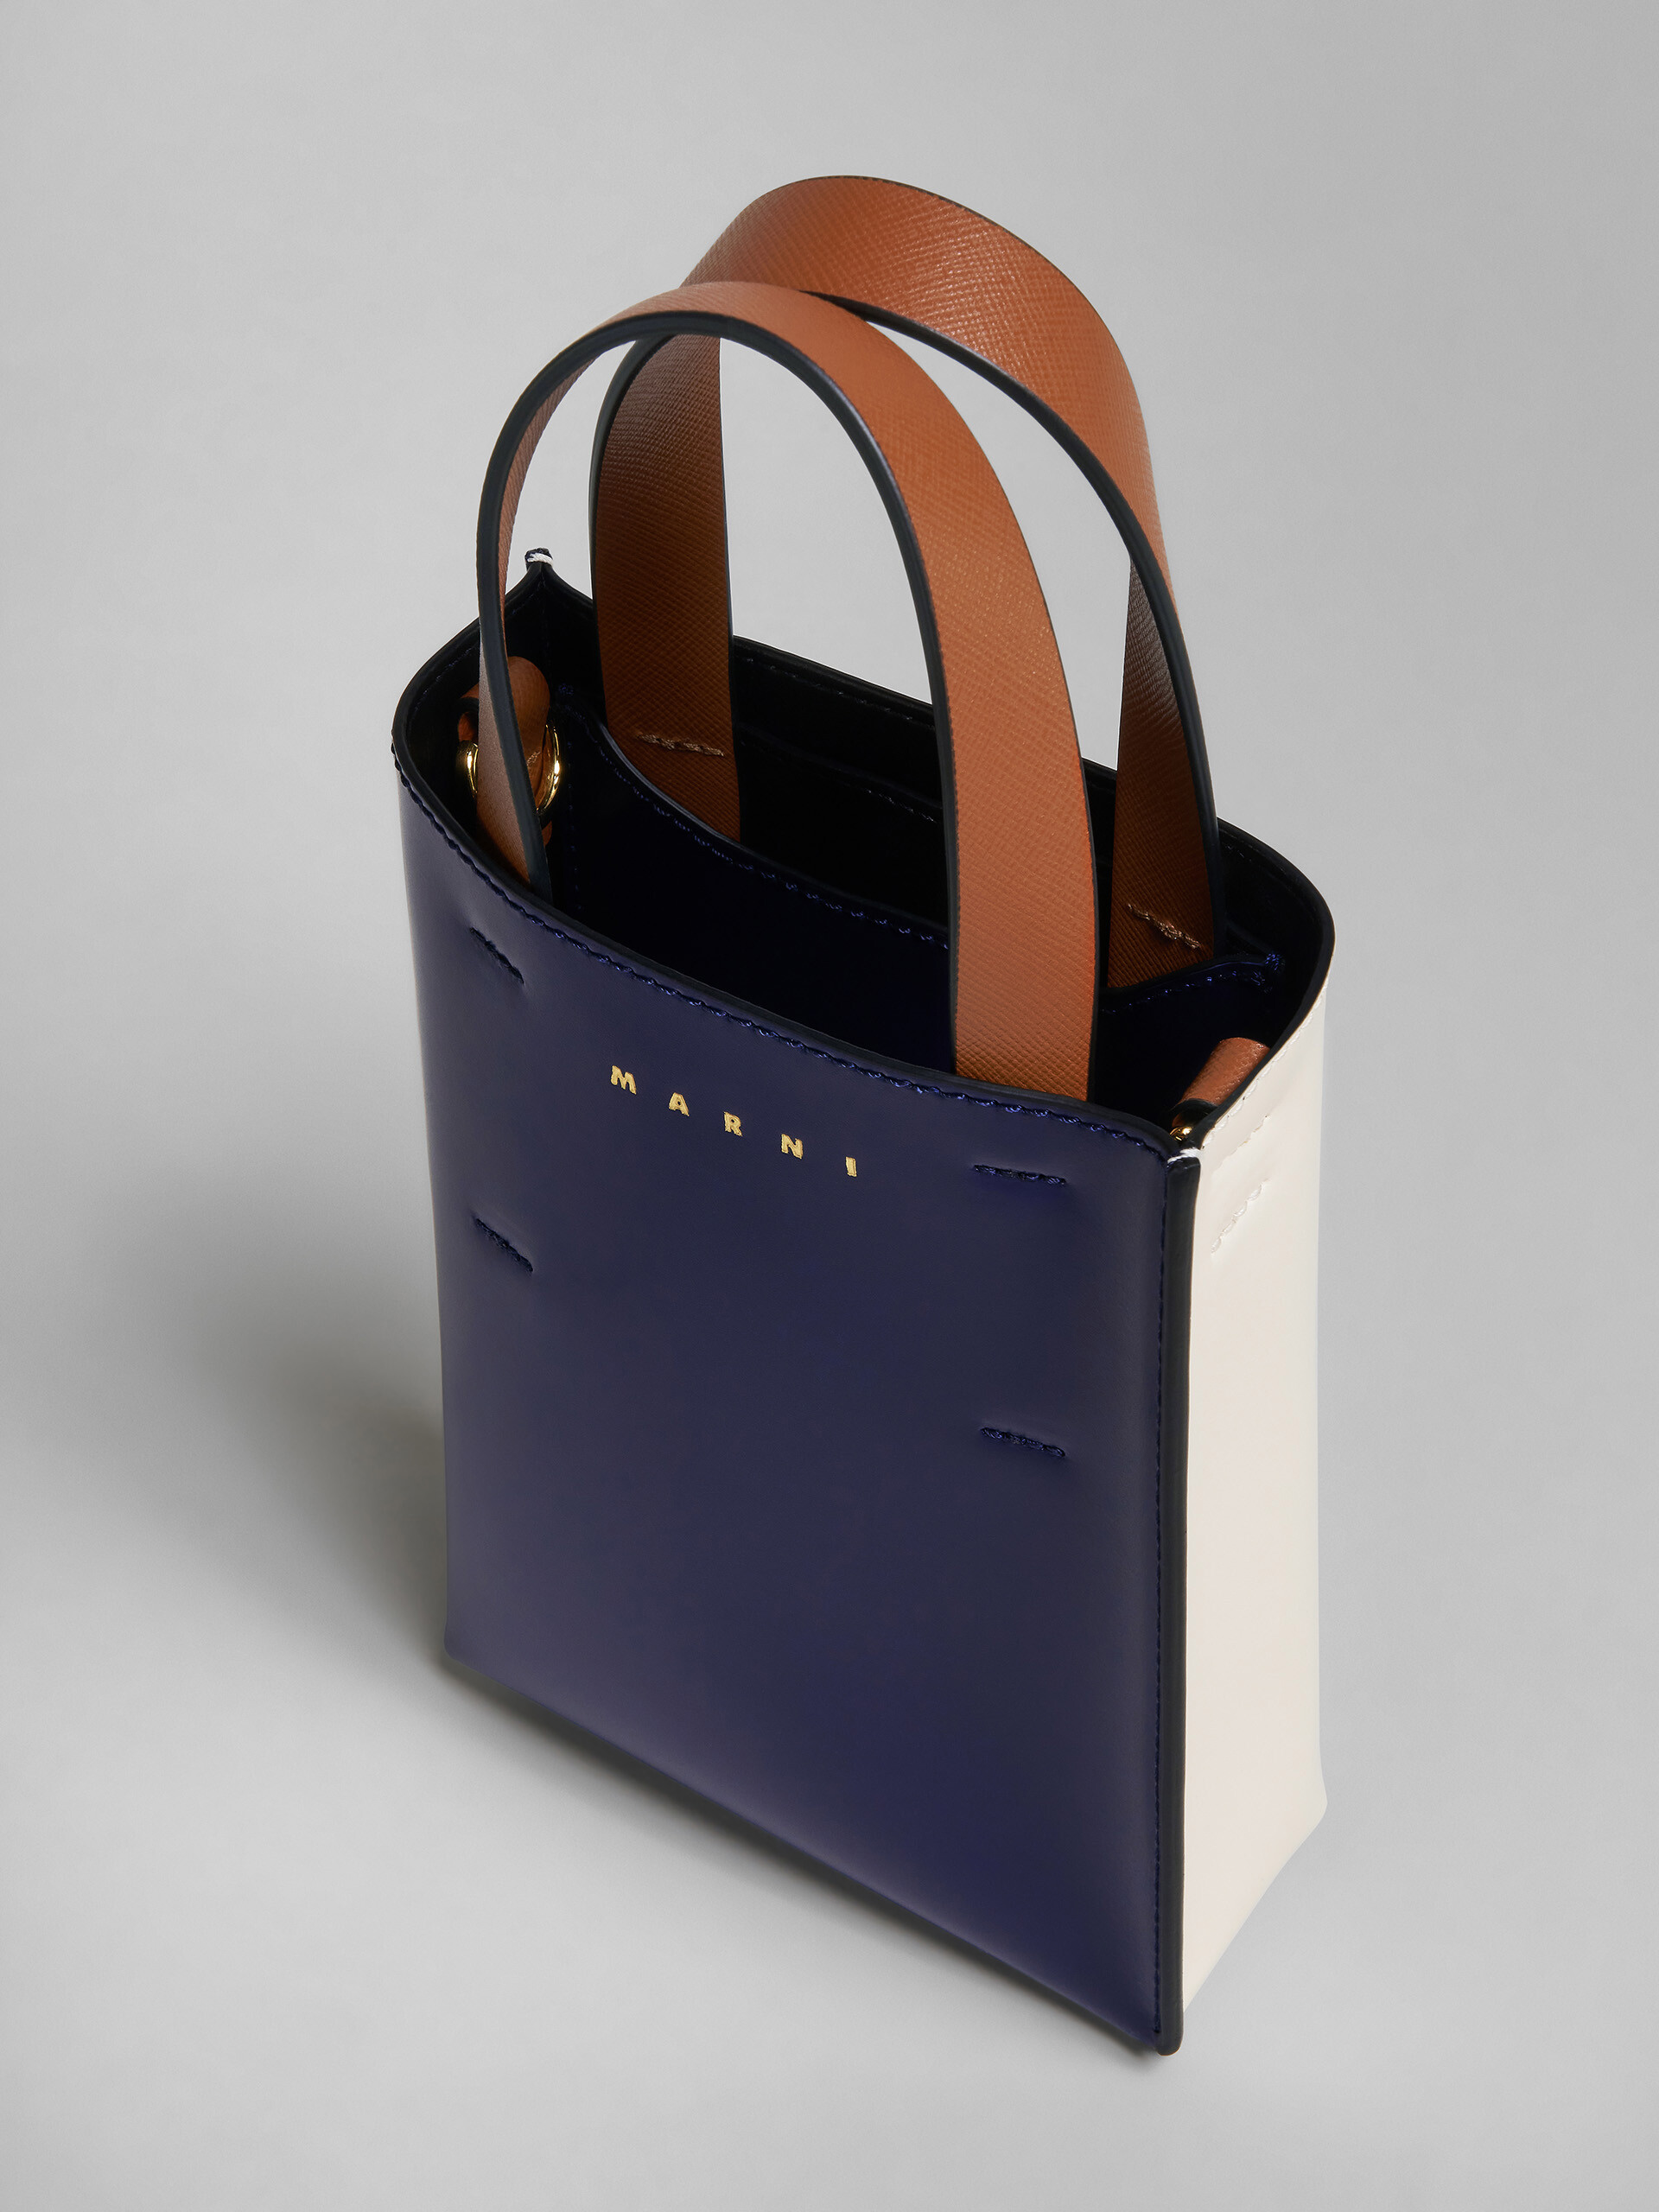 MUSEO nano bag in blue and white leather - Shopping Bags - Image 4